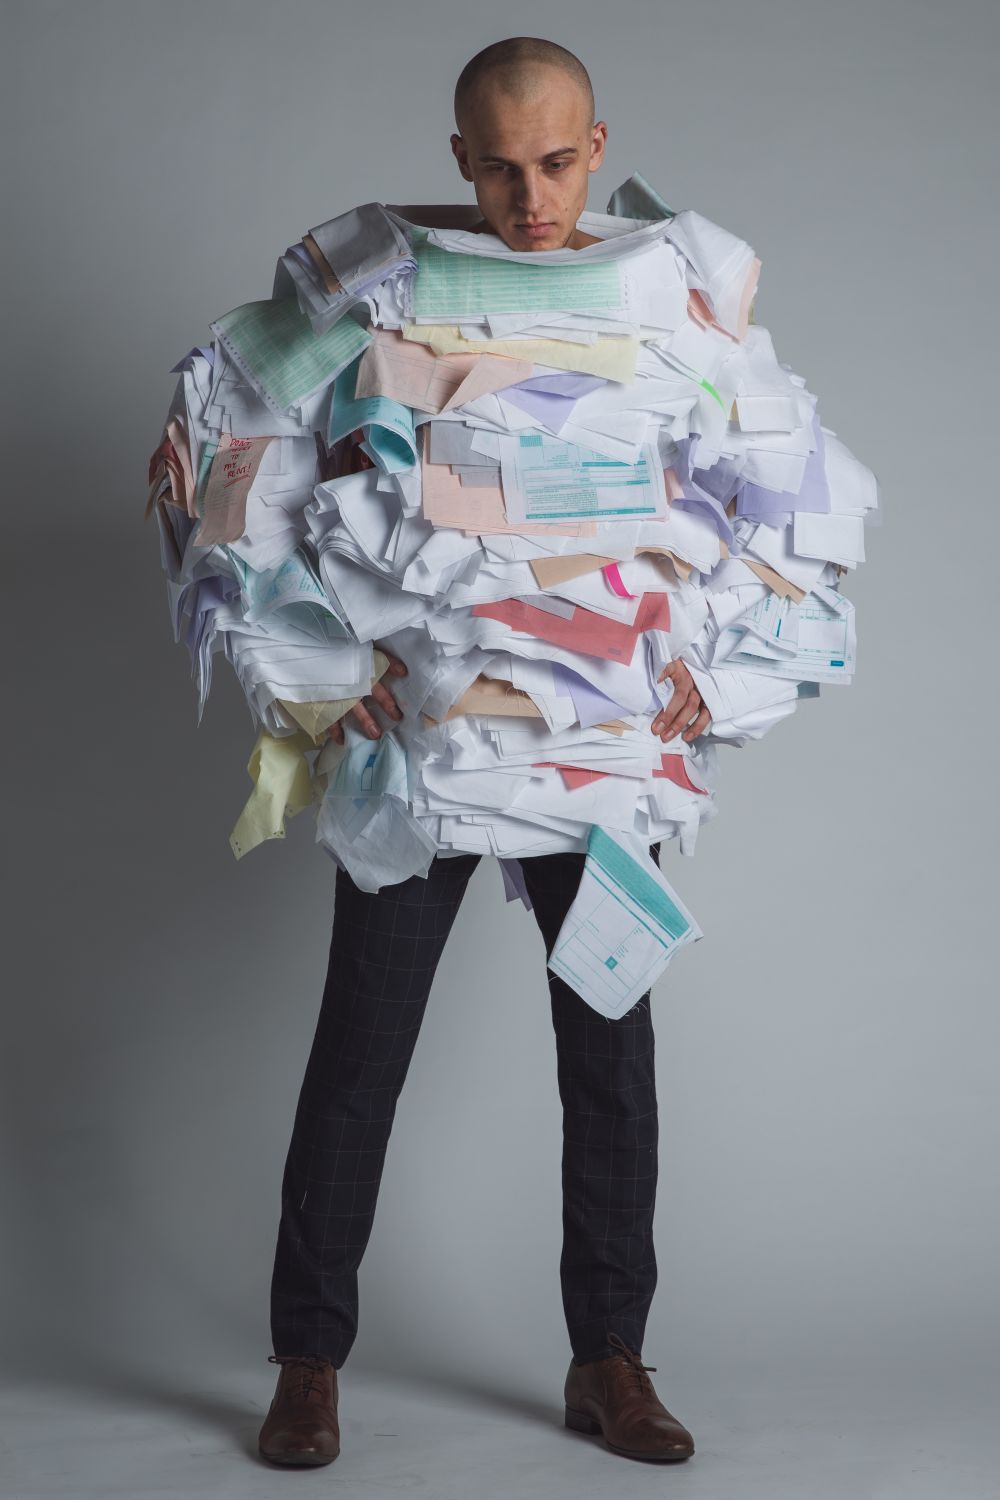 model standing in oversized garment with layered rough fabric that looks like piles of papers, application forms and bills.